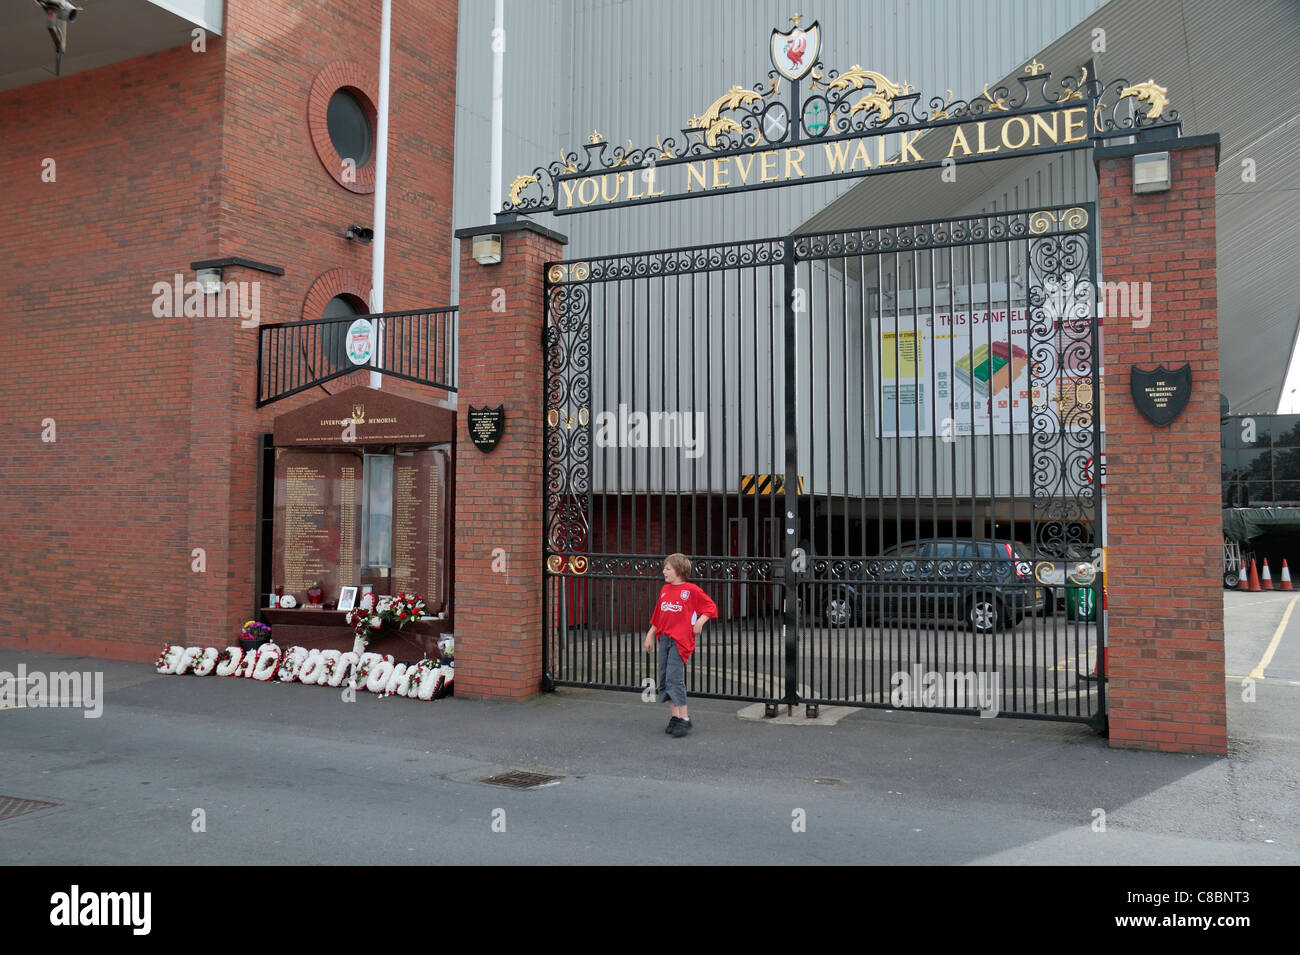 A young fan poses at the Anfield Road gates to Anfield, beside the Hillsborough disaster memorial, Liverpool football club. Stock Photo